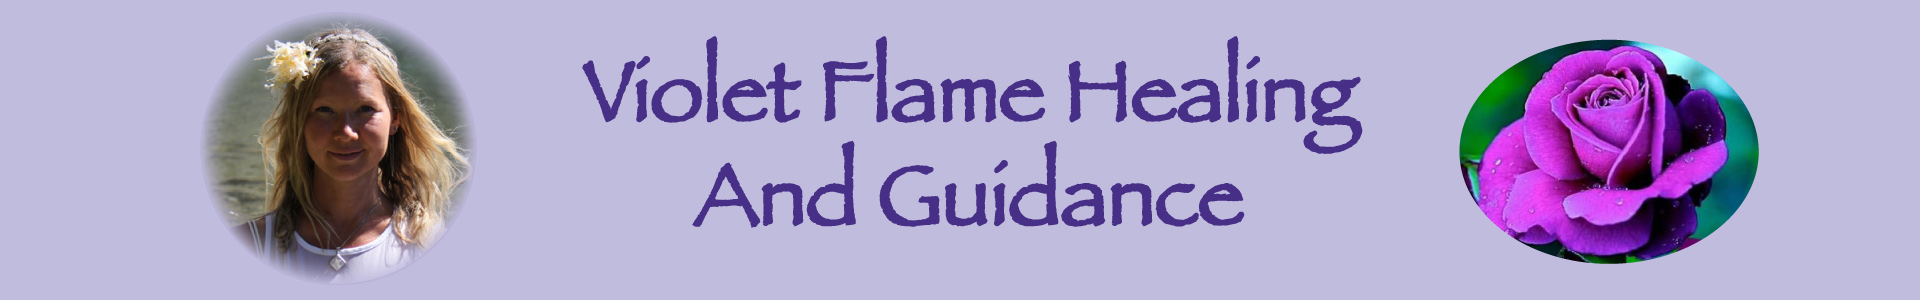 Violet Flame Healing & Guidance - Contact